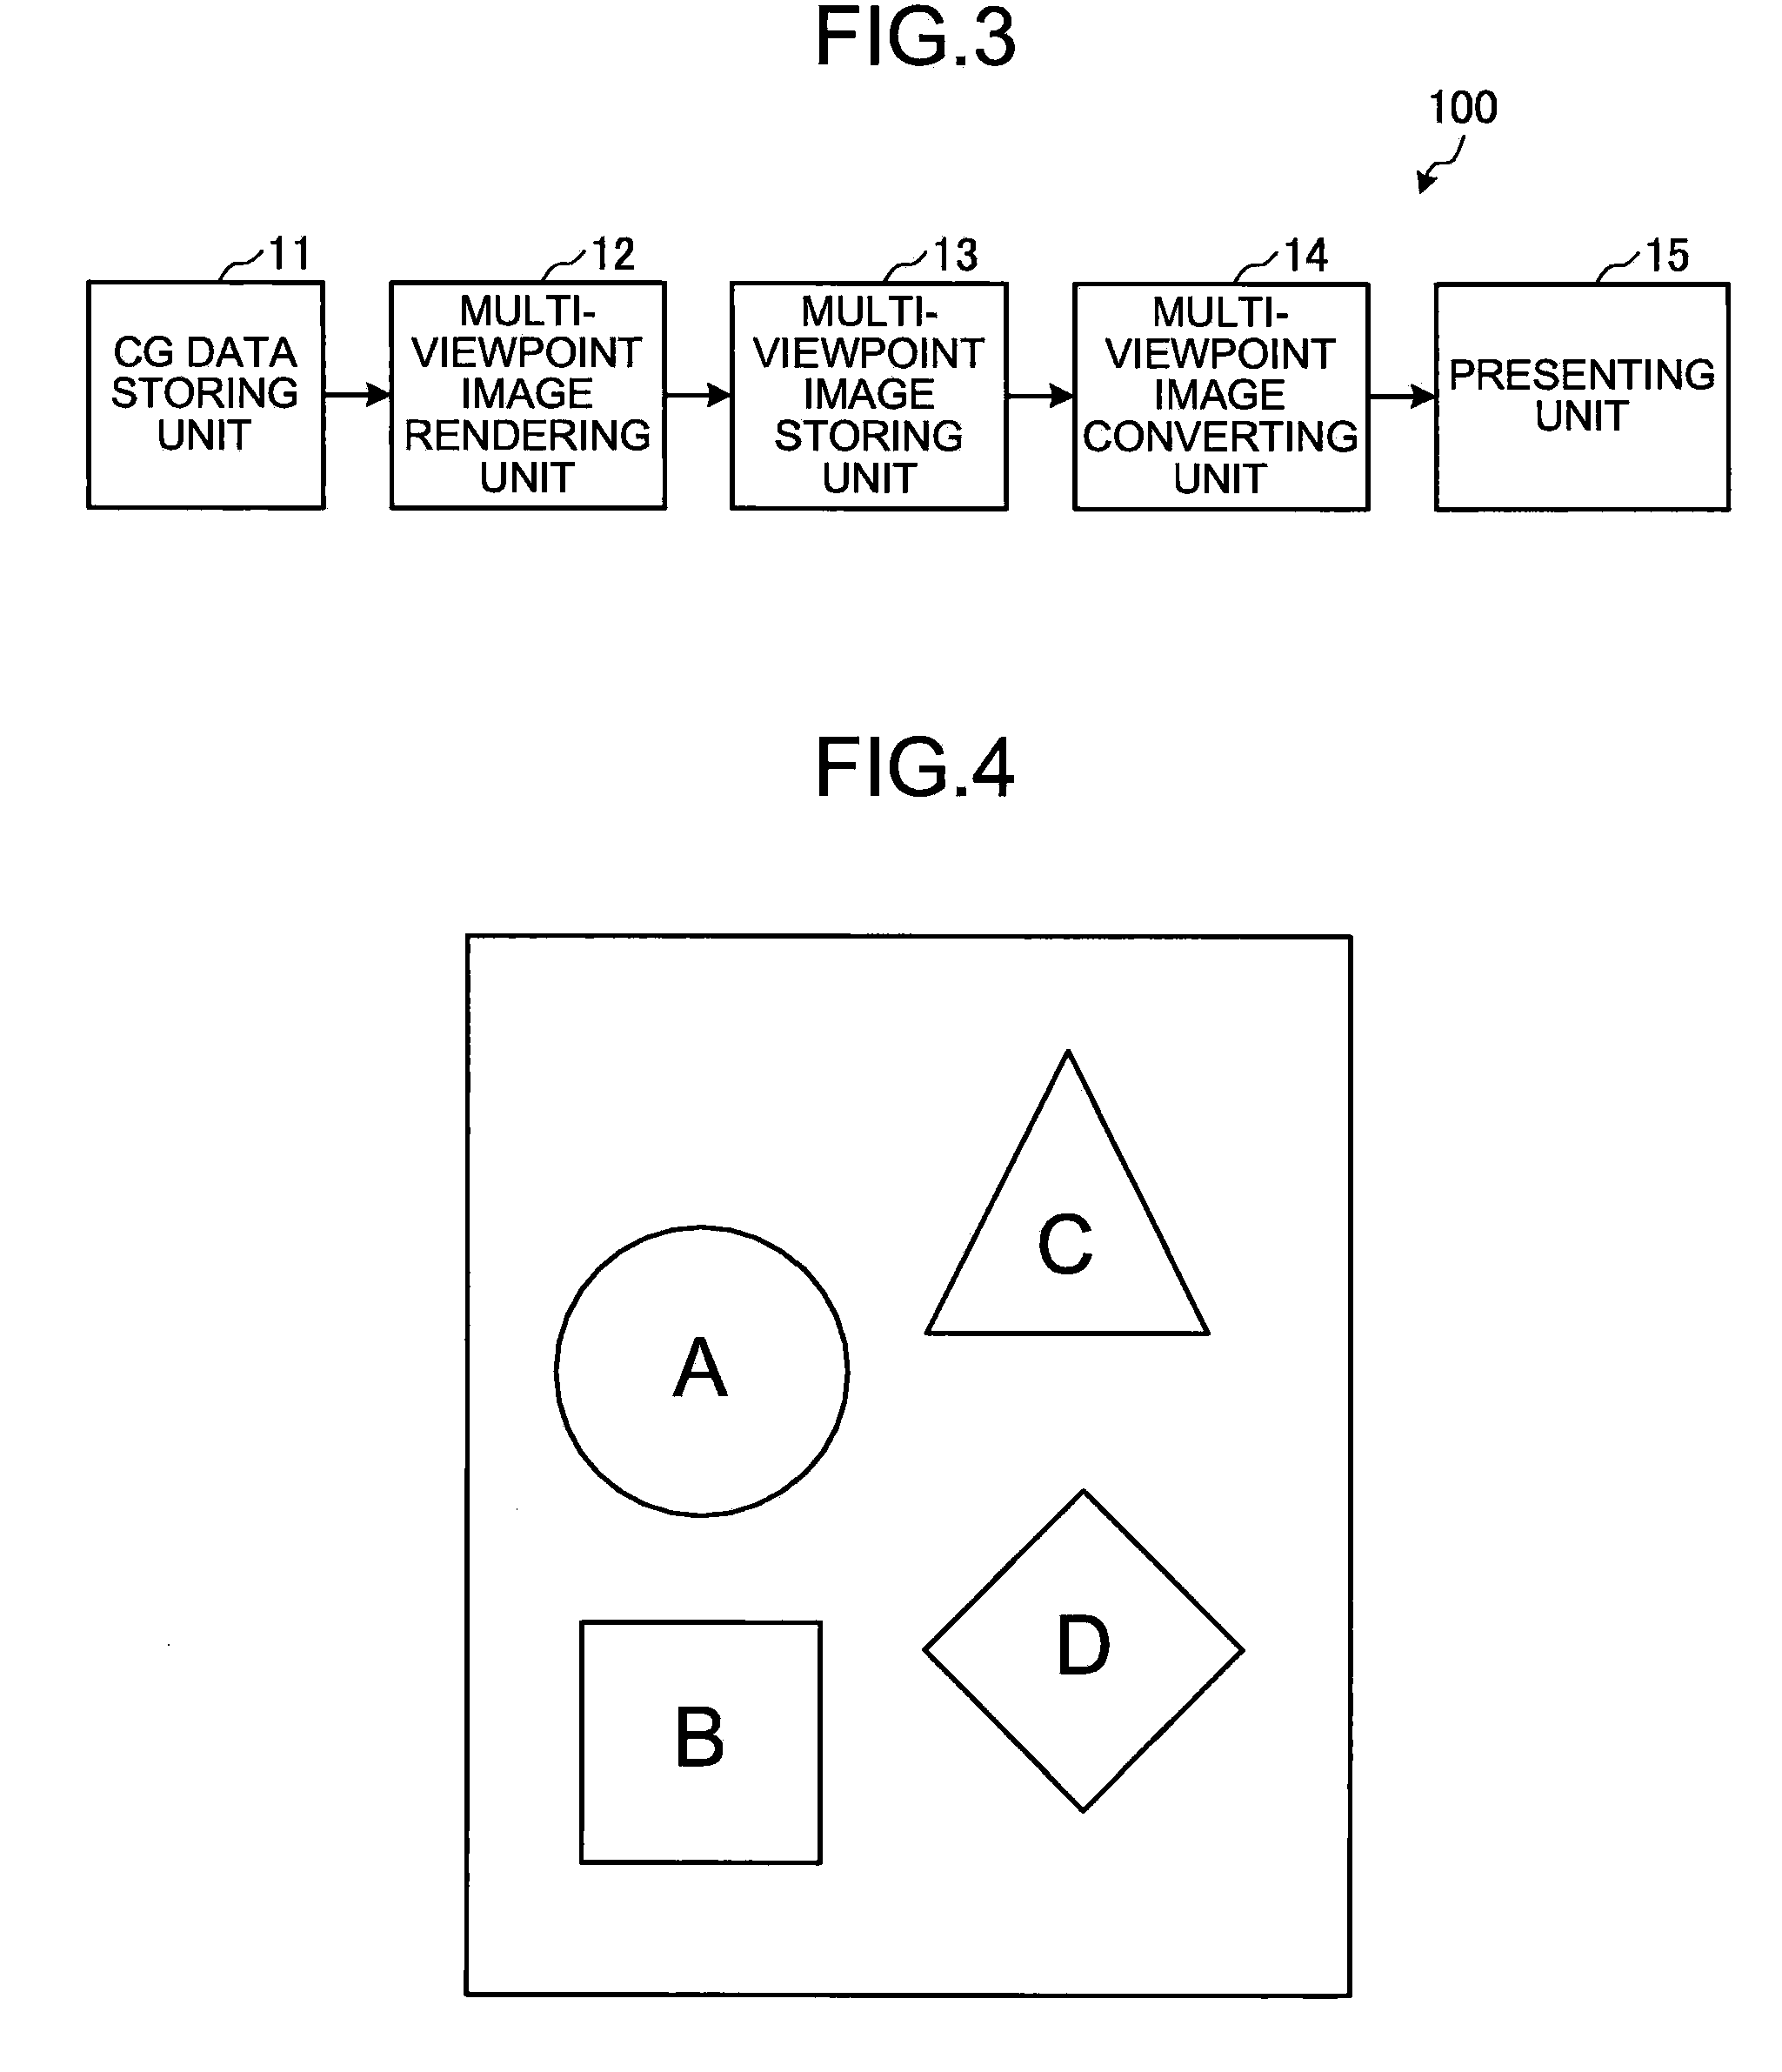 Apparatus, method, and computer program product for rendering multi-viewpoint images